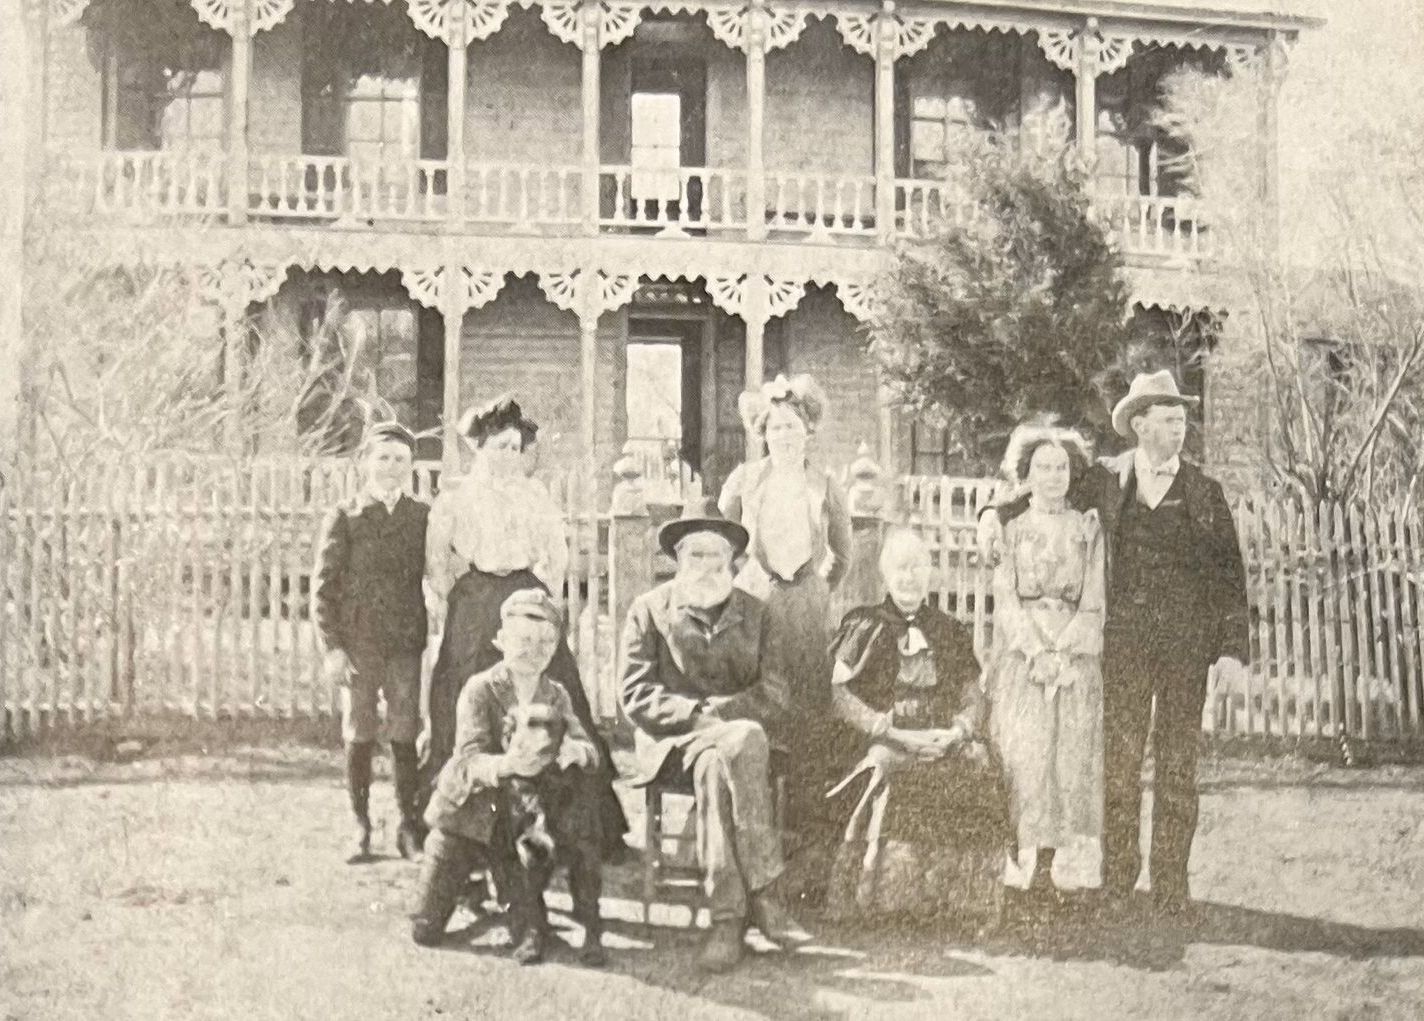 A group of people are posing for a picture in front of a house.